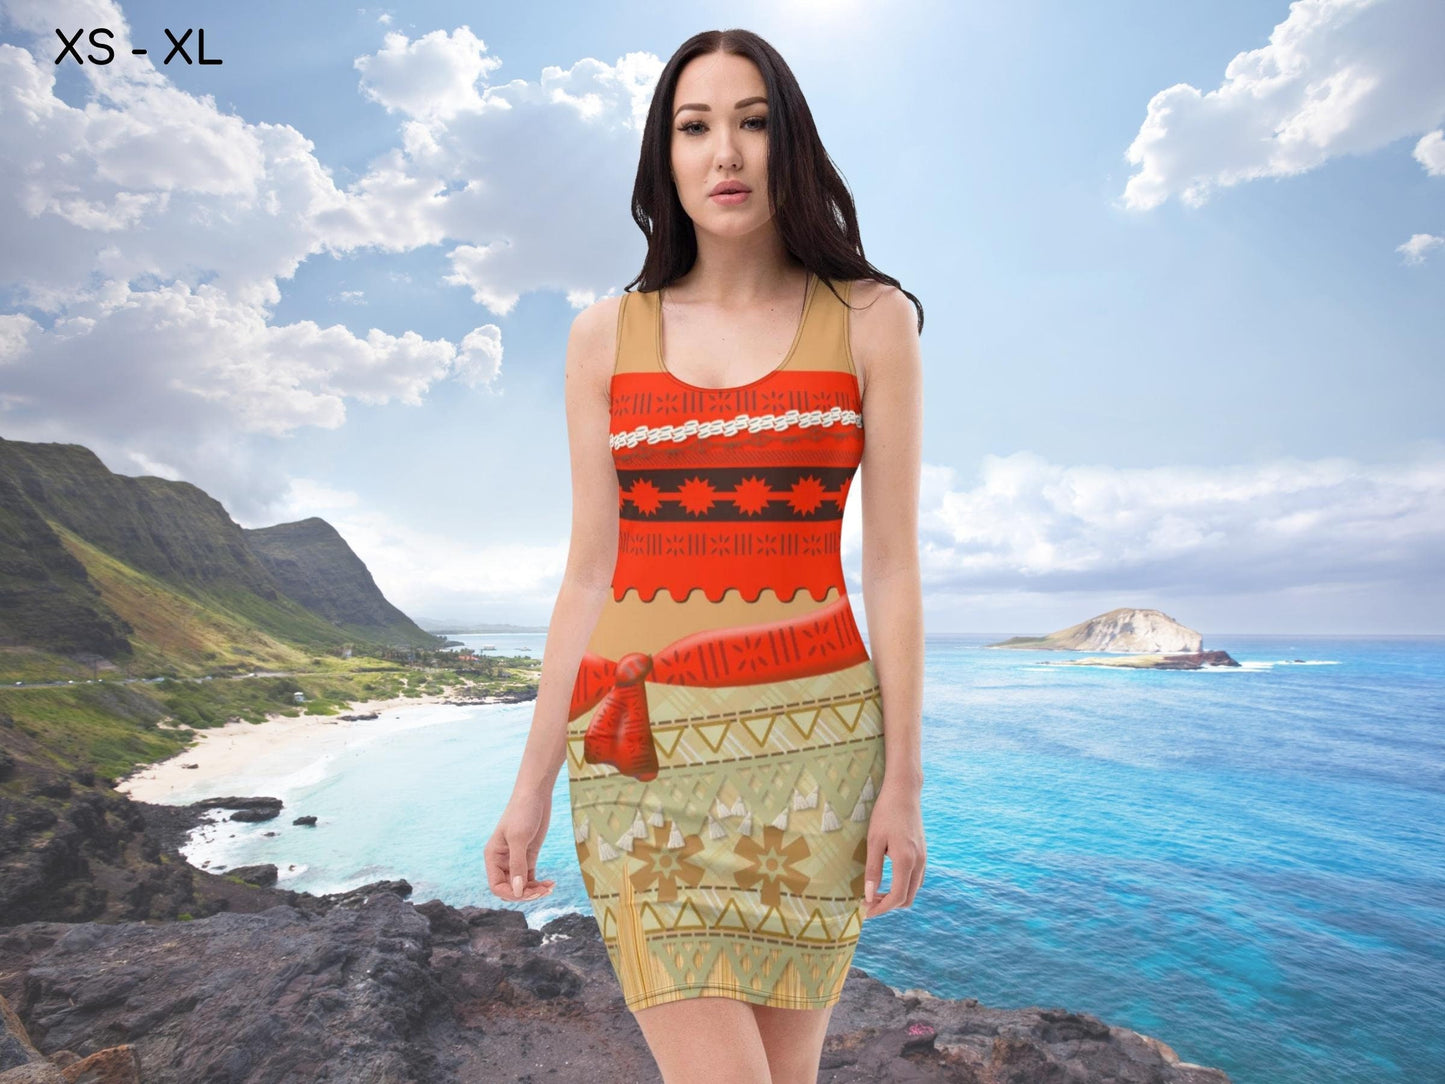 Moana Inspired Bright Red Bodycon, Princess, Cosplay, Halloween Costume, Dapper Days, Gift for Her, Adult Halloween Costume, Hawaii